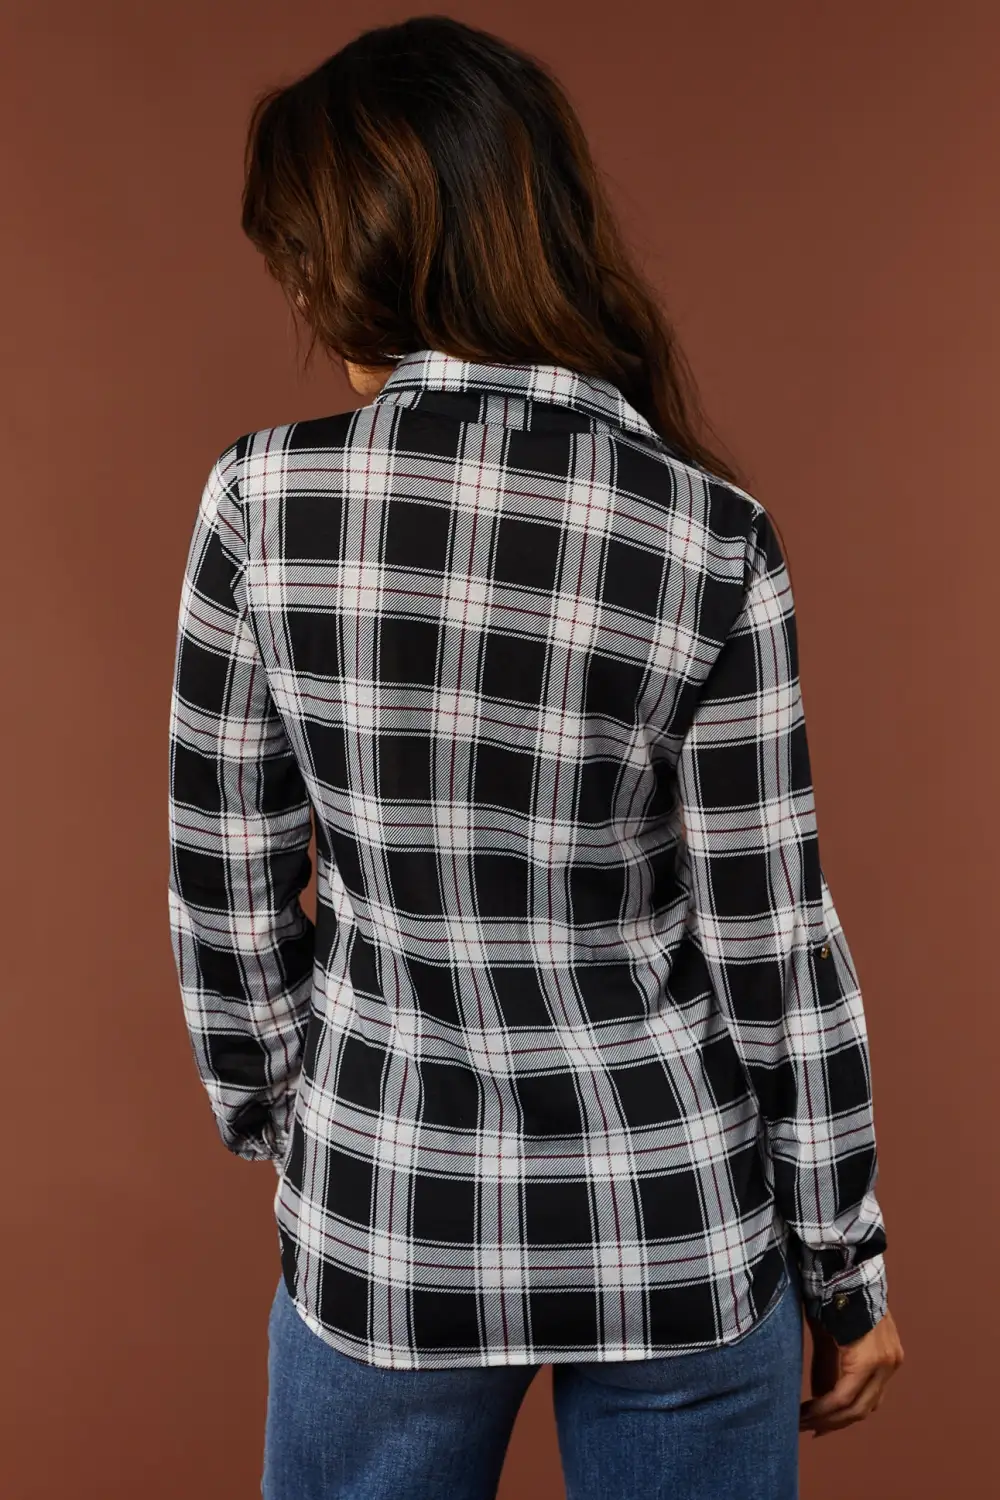 Black and Maroon Plaid Top with Chest Pocket